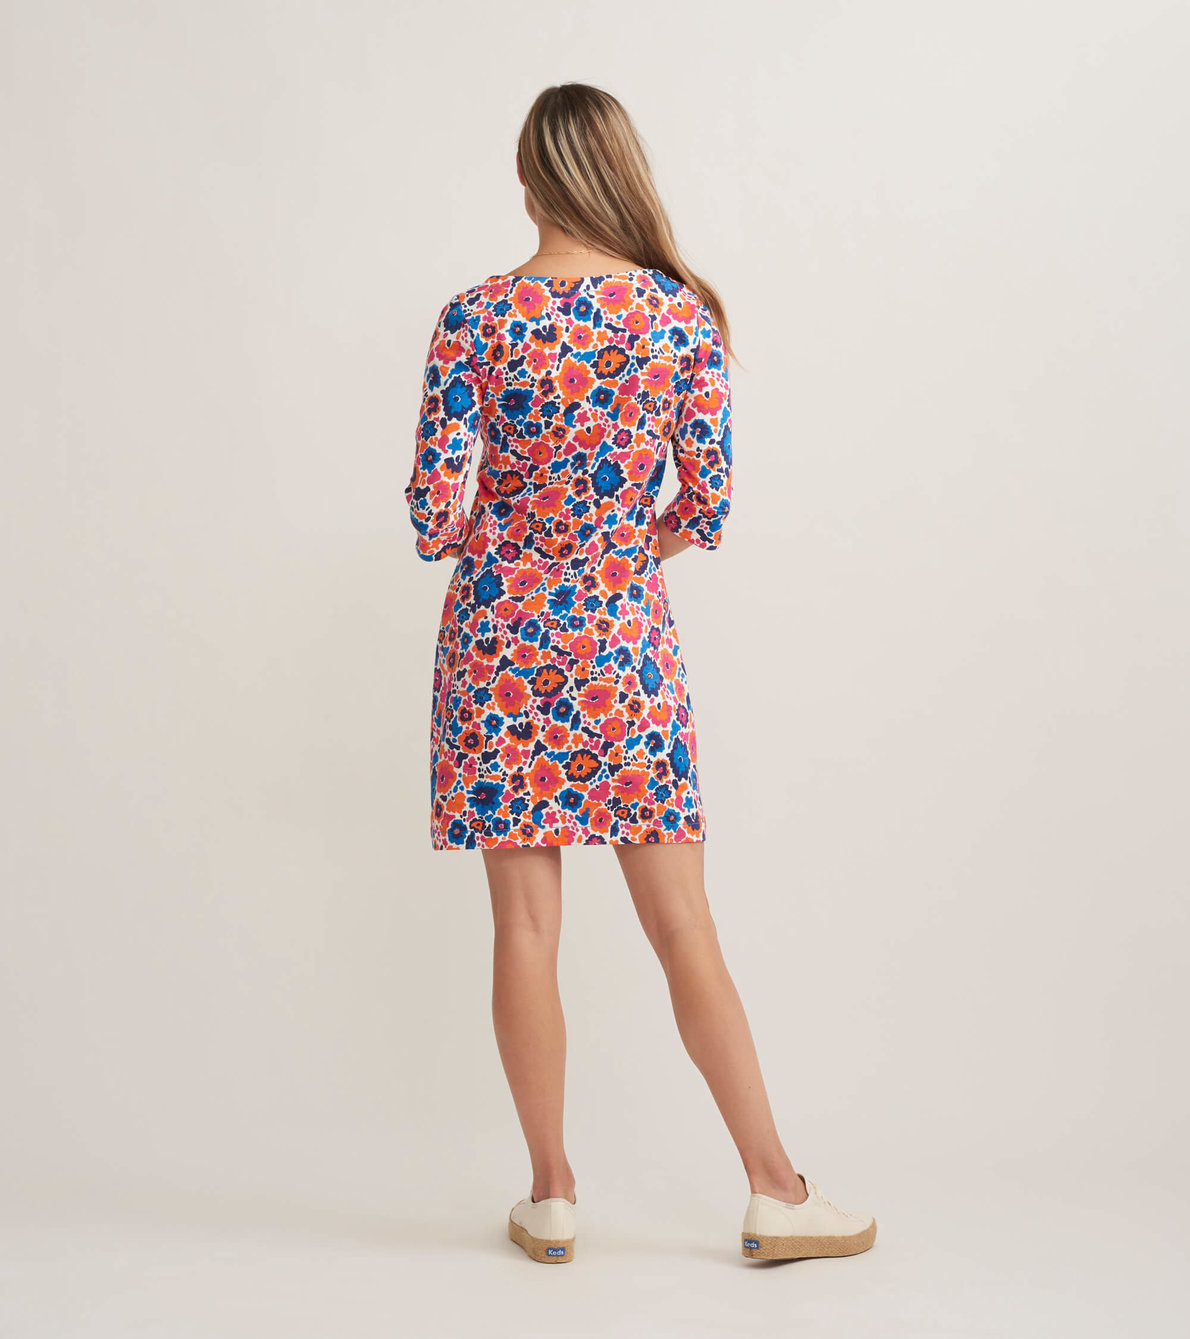 View larger image of Lucy Dress - Pop Out Floral